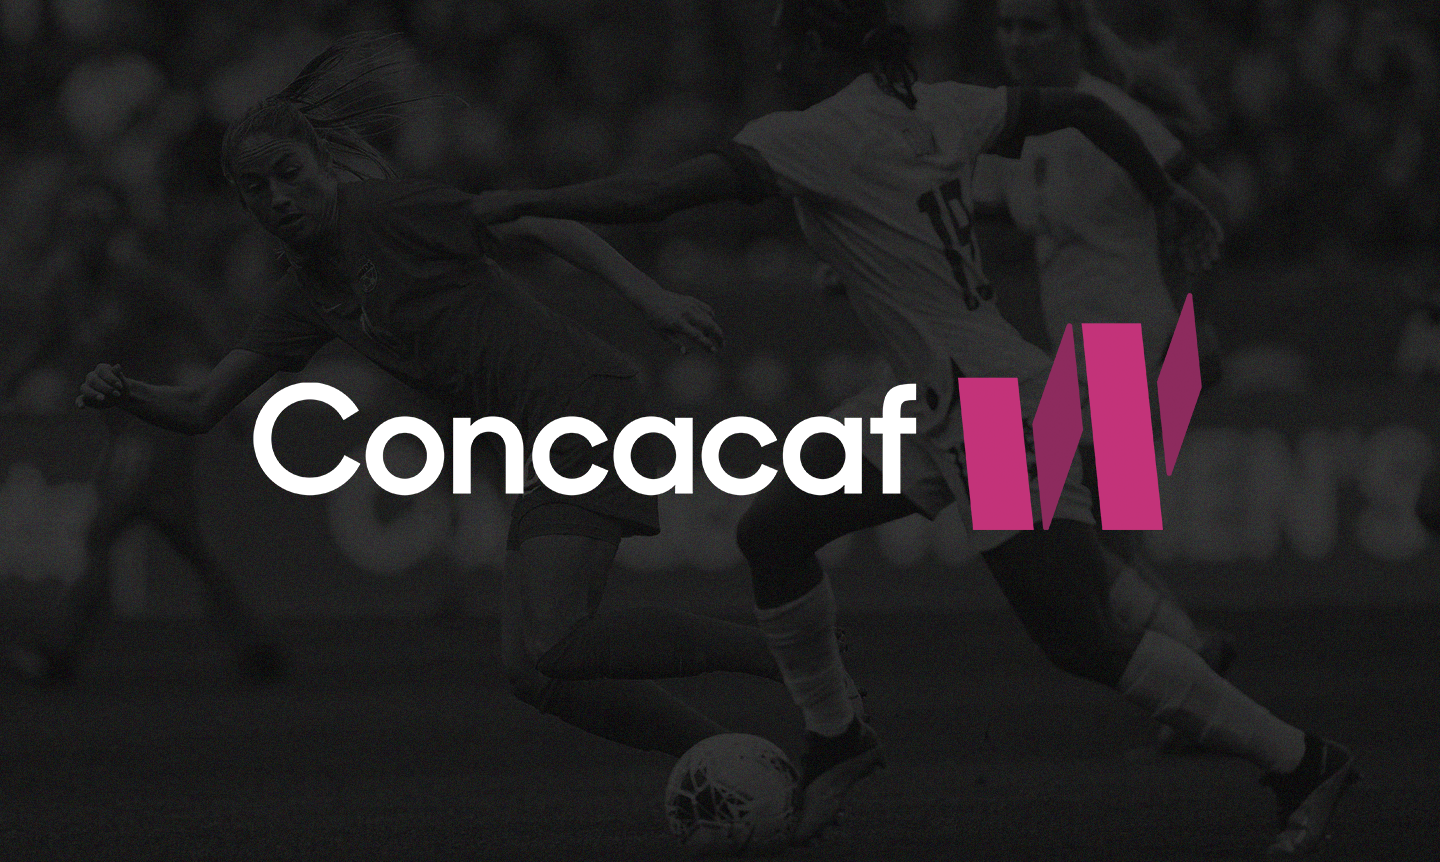 Concacaf to launch women's soccer Champions League after 2023